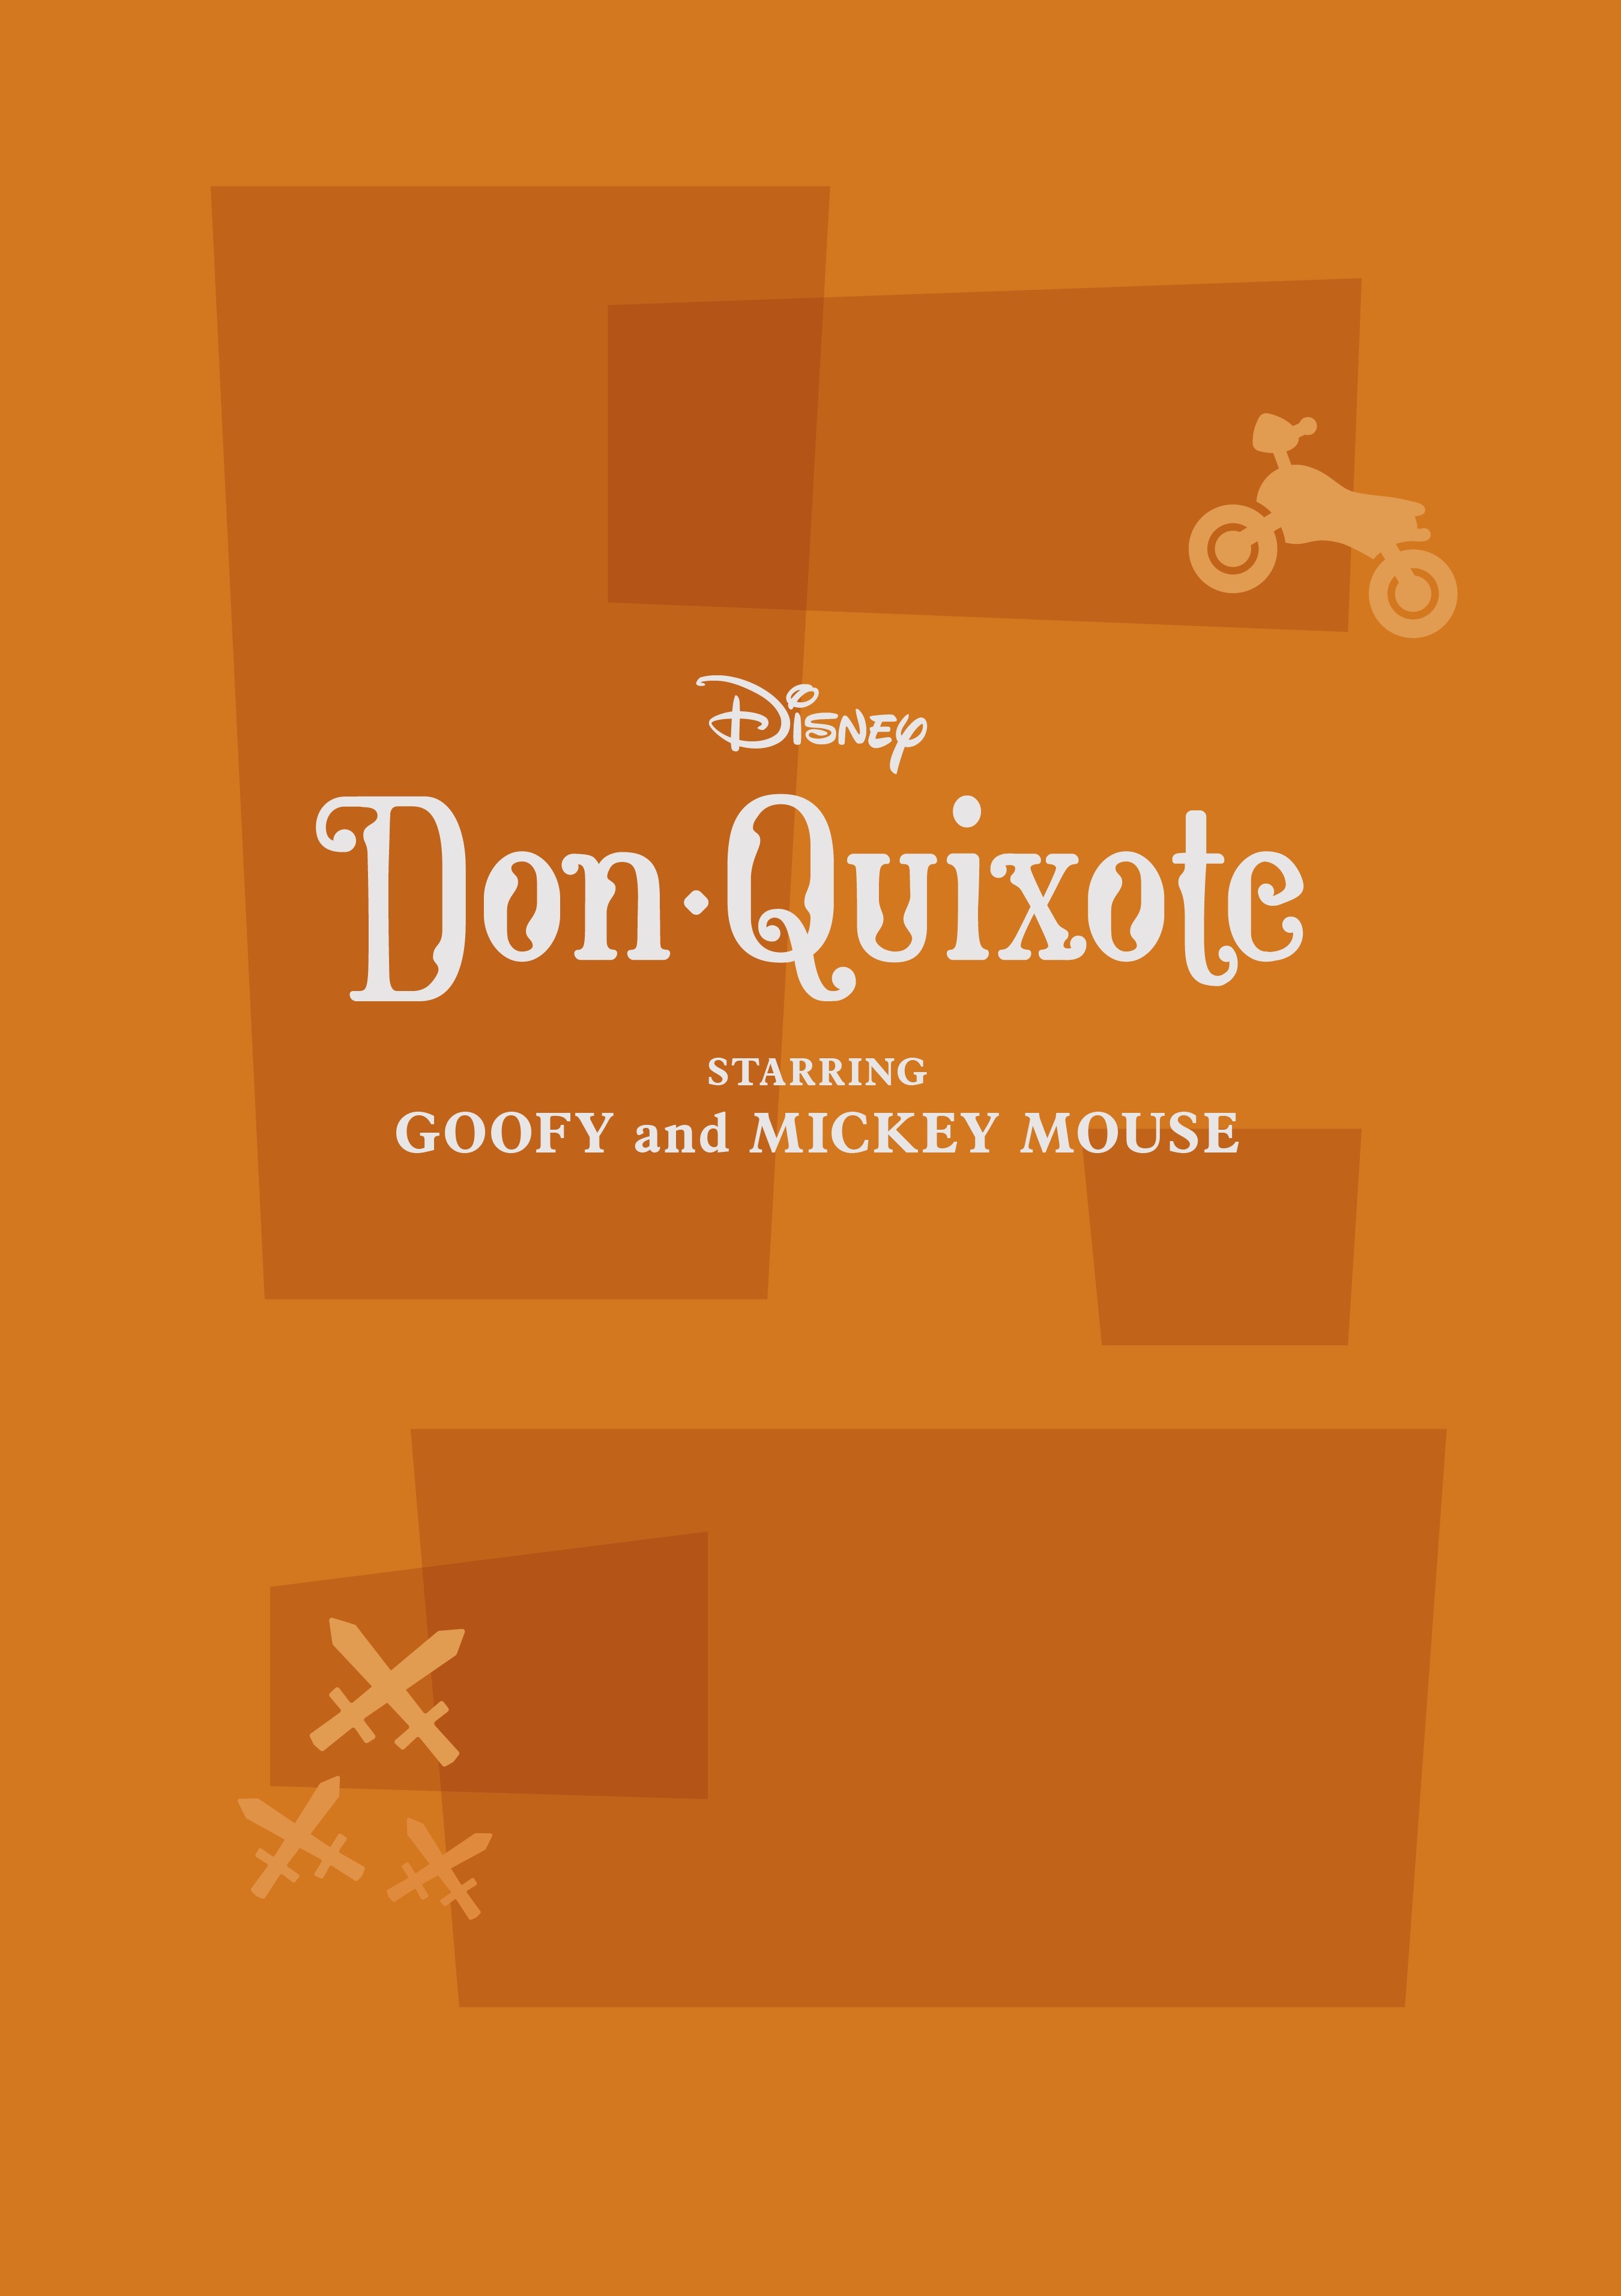 Read online Disney Don Quixote, Starring Goofy and Mickey Mouse comic -  Issue # TPB - 2